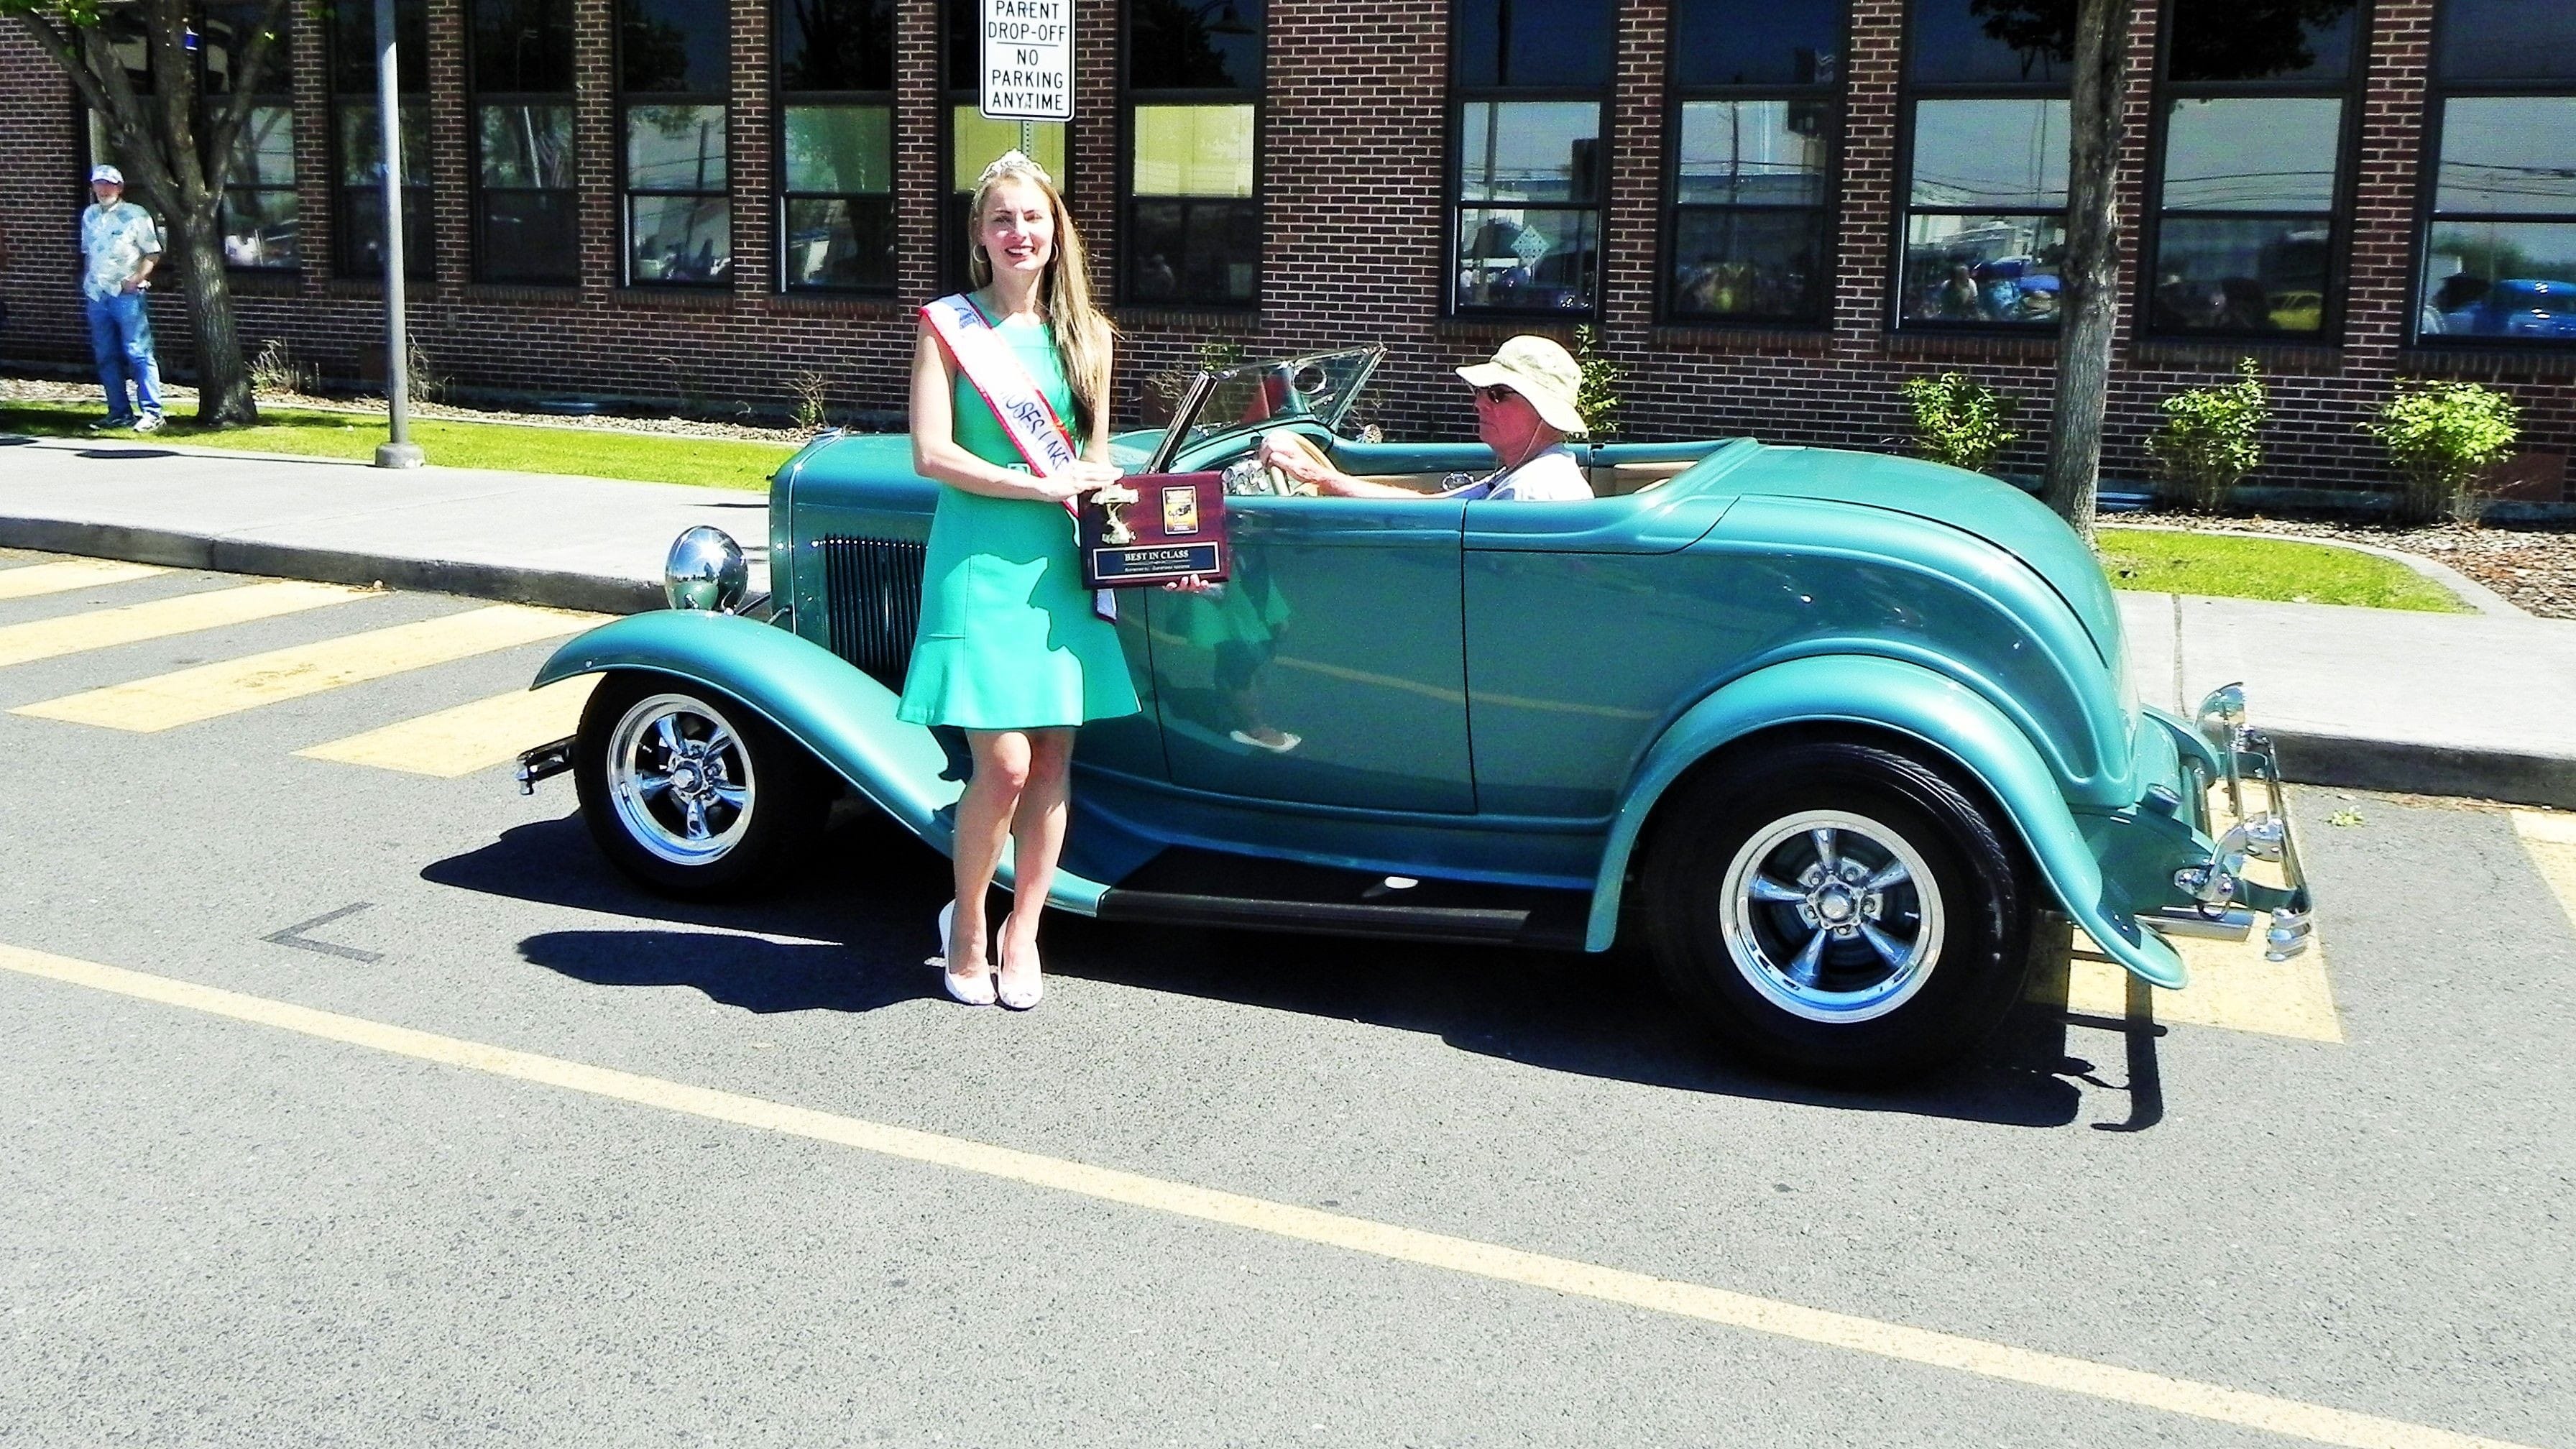 1932 Ford Roadster Coupe - Best Paint - Derrell Francis